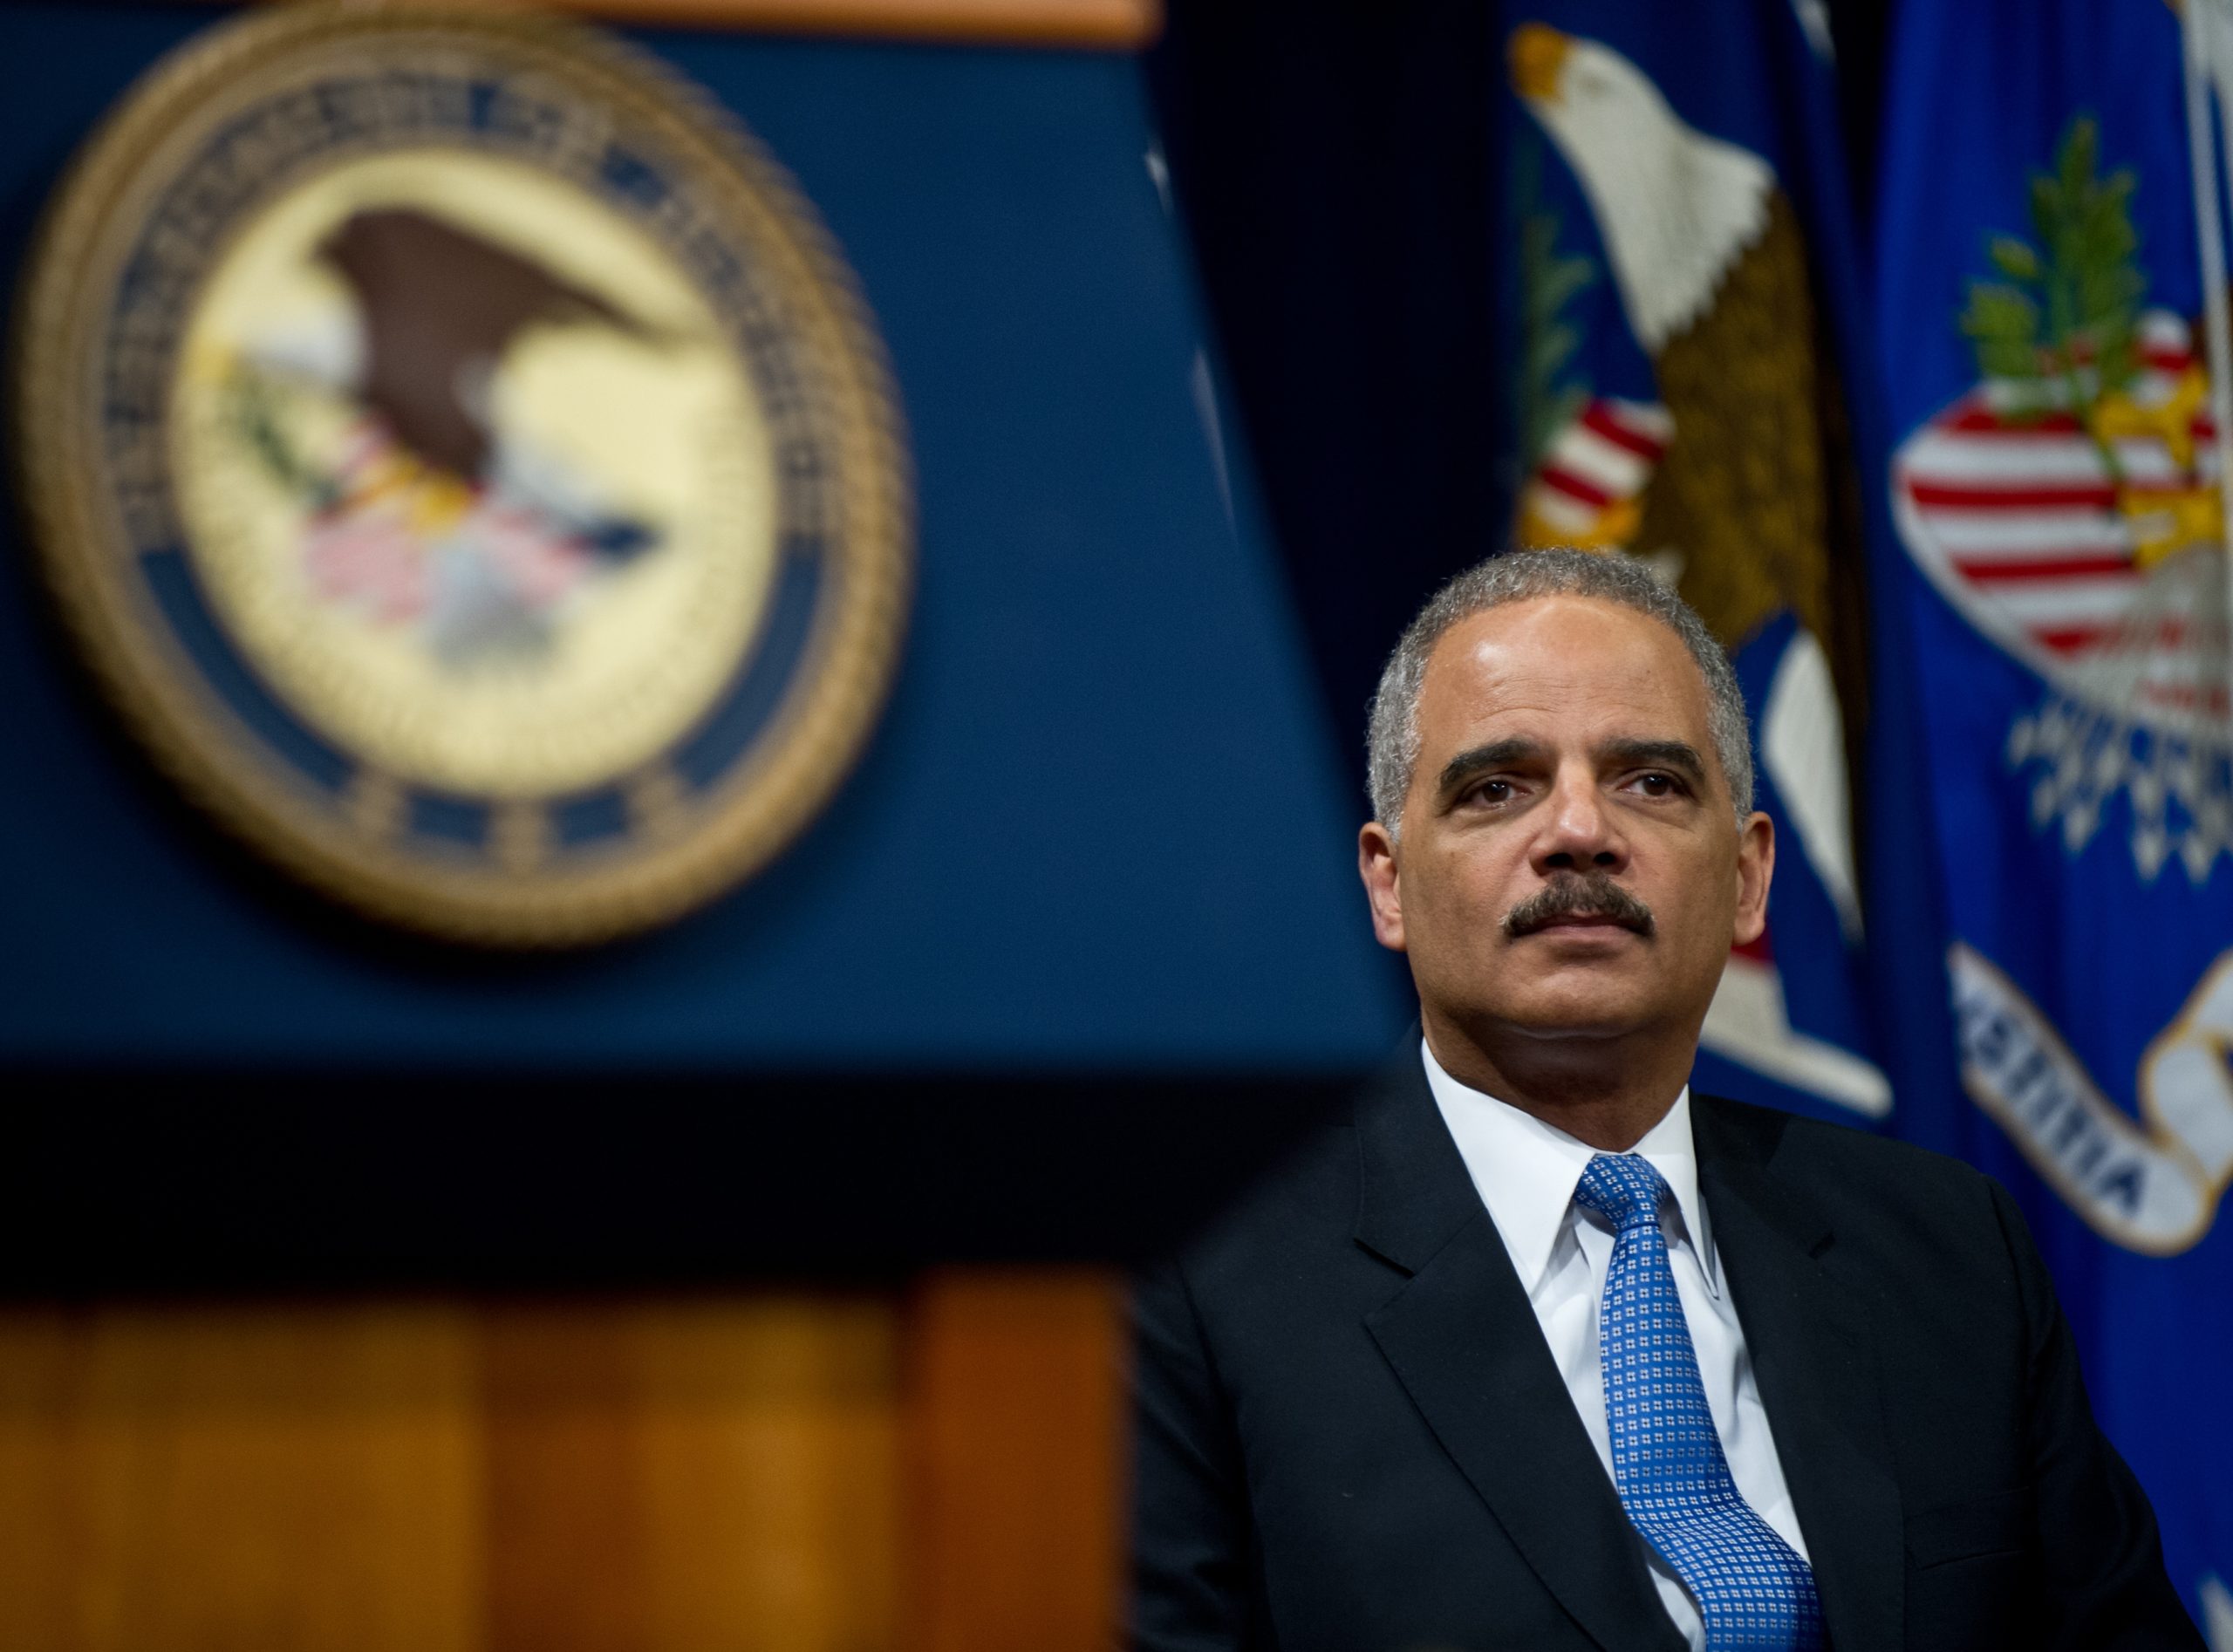 US Attorney General Eric Holder waits to address the Justice Department's Lesbian, Gay, Bisexual and Transgender (LGBT) Pride Month event at the Justice Department in Washington,DC on June 18, 2013. AFP PHOTO/Nicholas KAMM (Photo credit should read NICHOLAS KAMM/AFP via Getty Images)